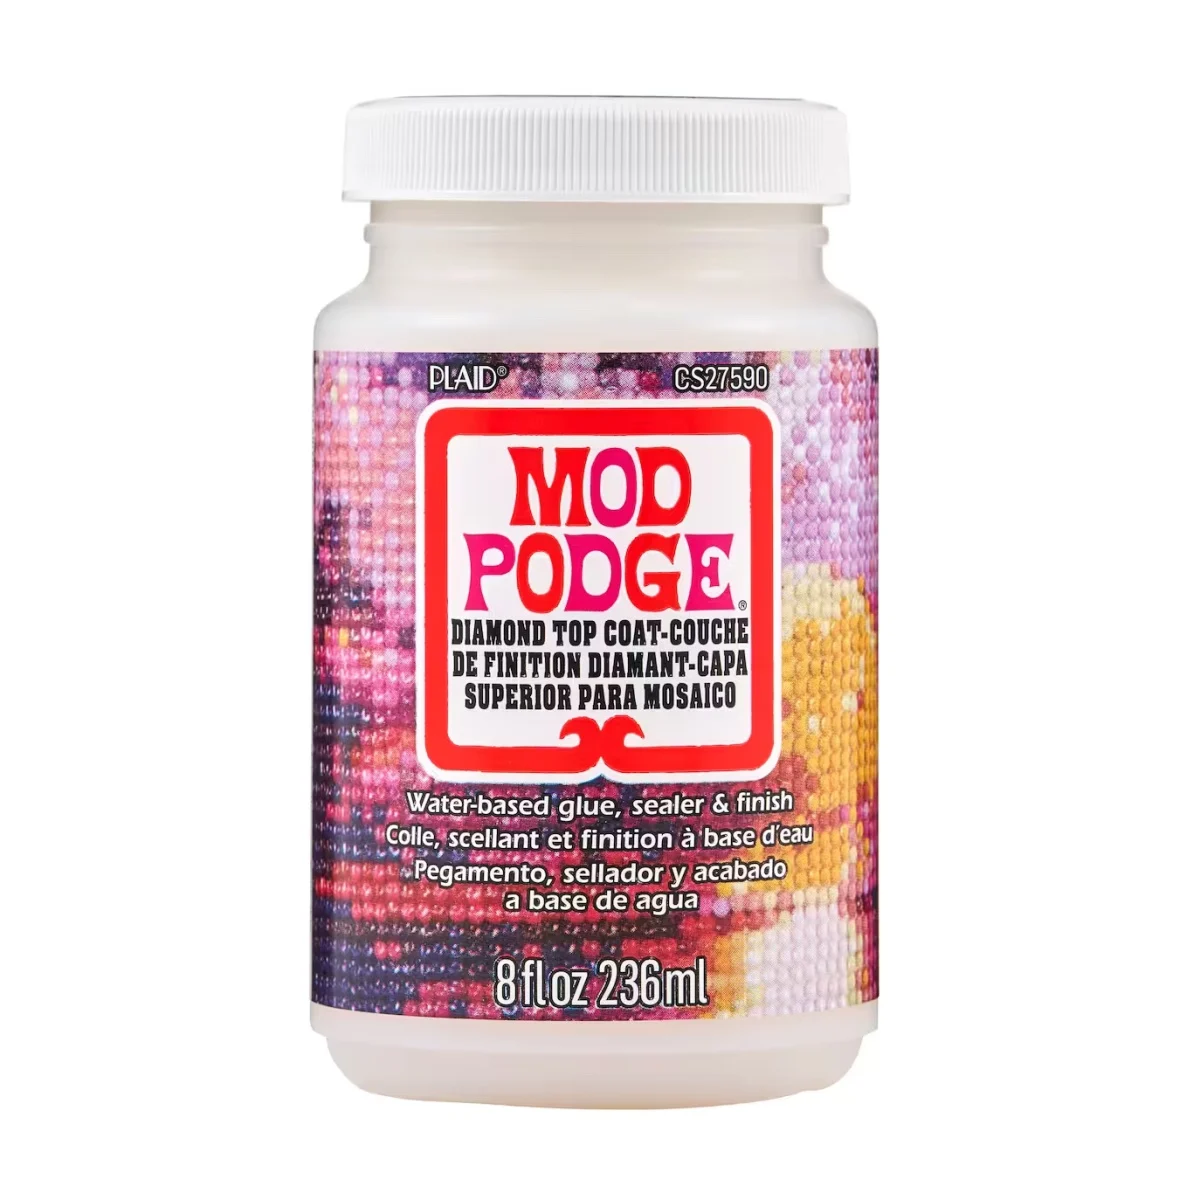 Mod Podge Finishes Brush - Provides Smooth Strokes with Finish, No Str